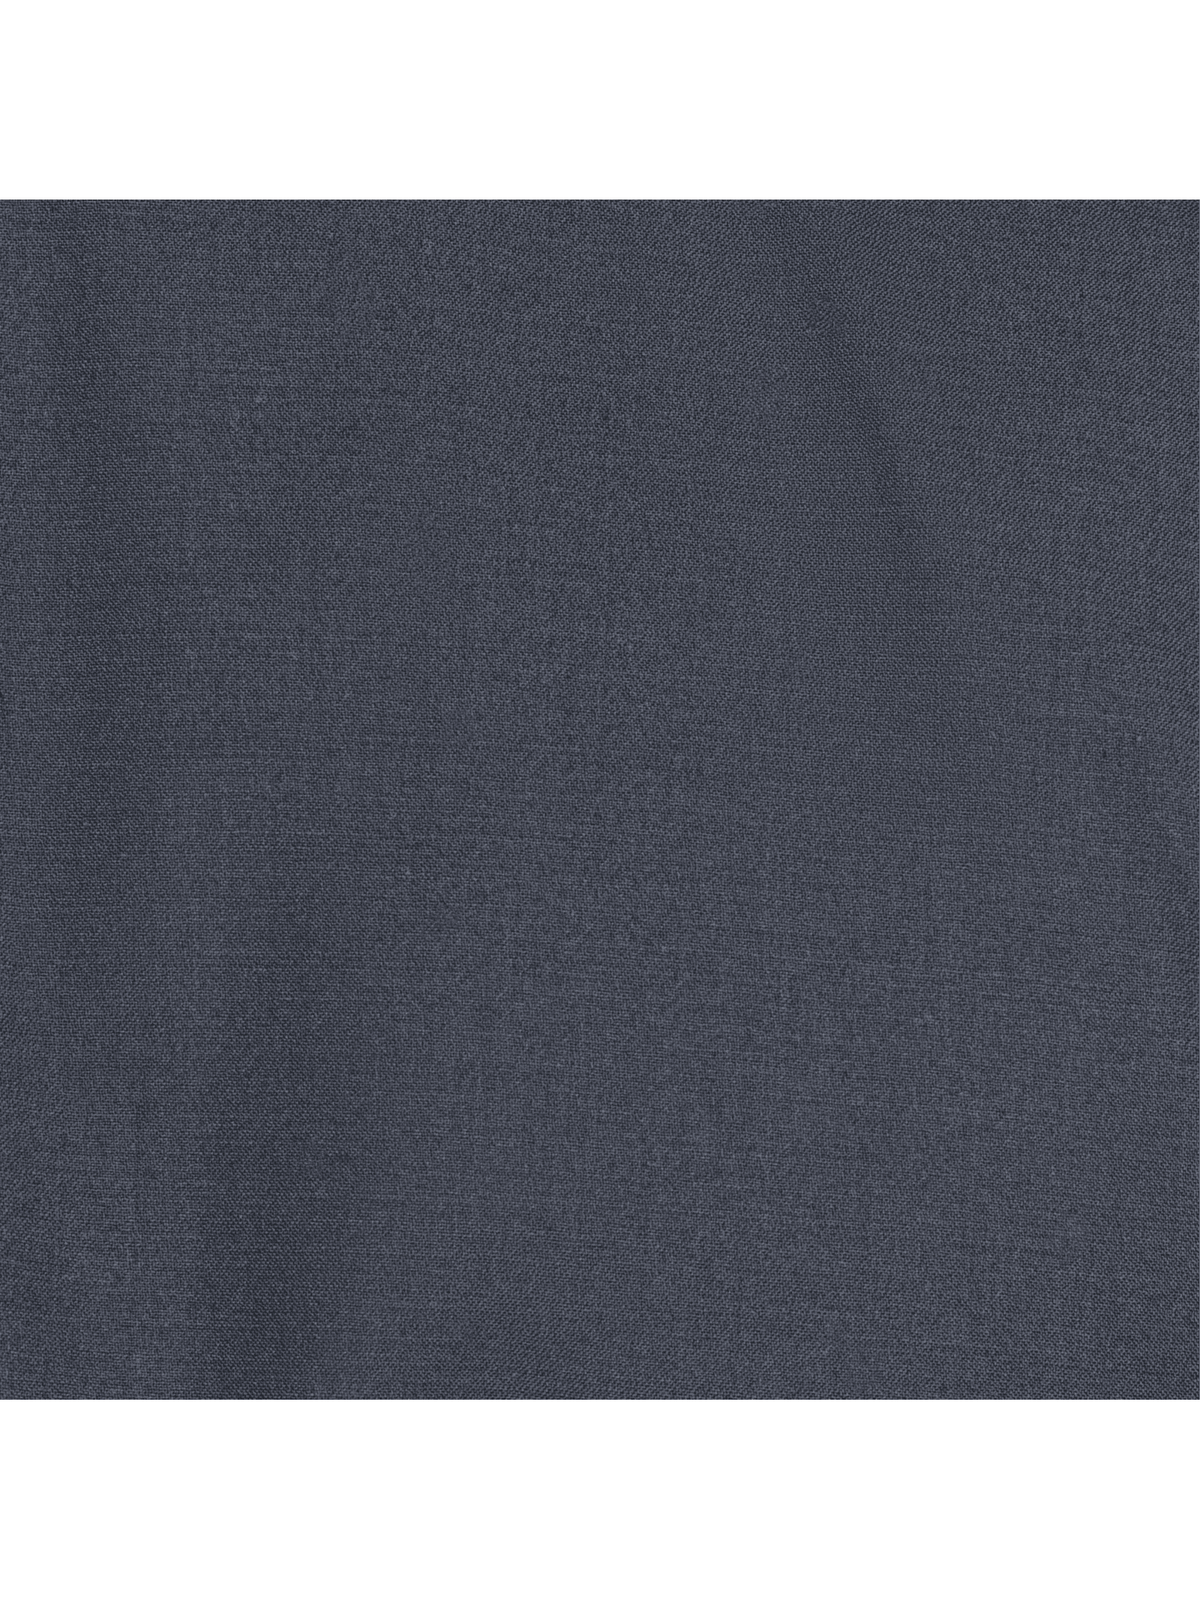 close up of 100% wool suit fabric